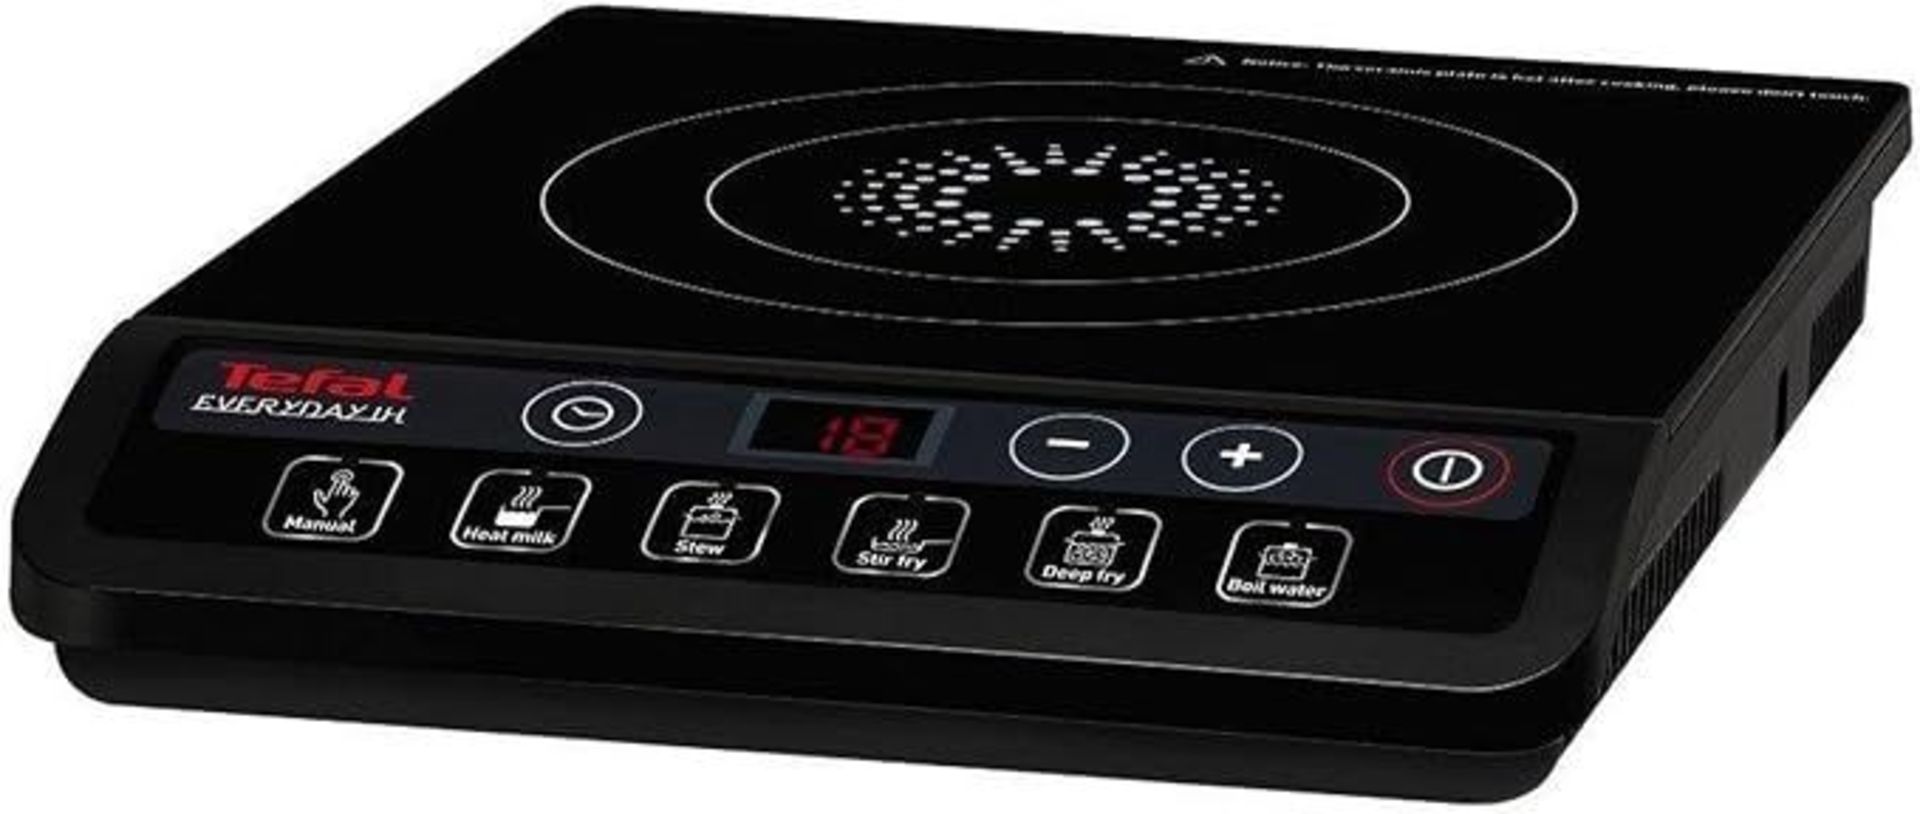 Tefal Everyday Induction Portable Hob, integrated timer, 6 pre-set functions, 9 power levels from